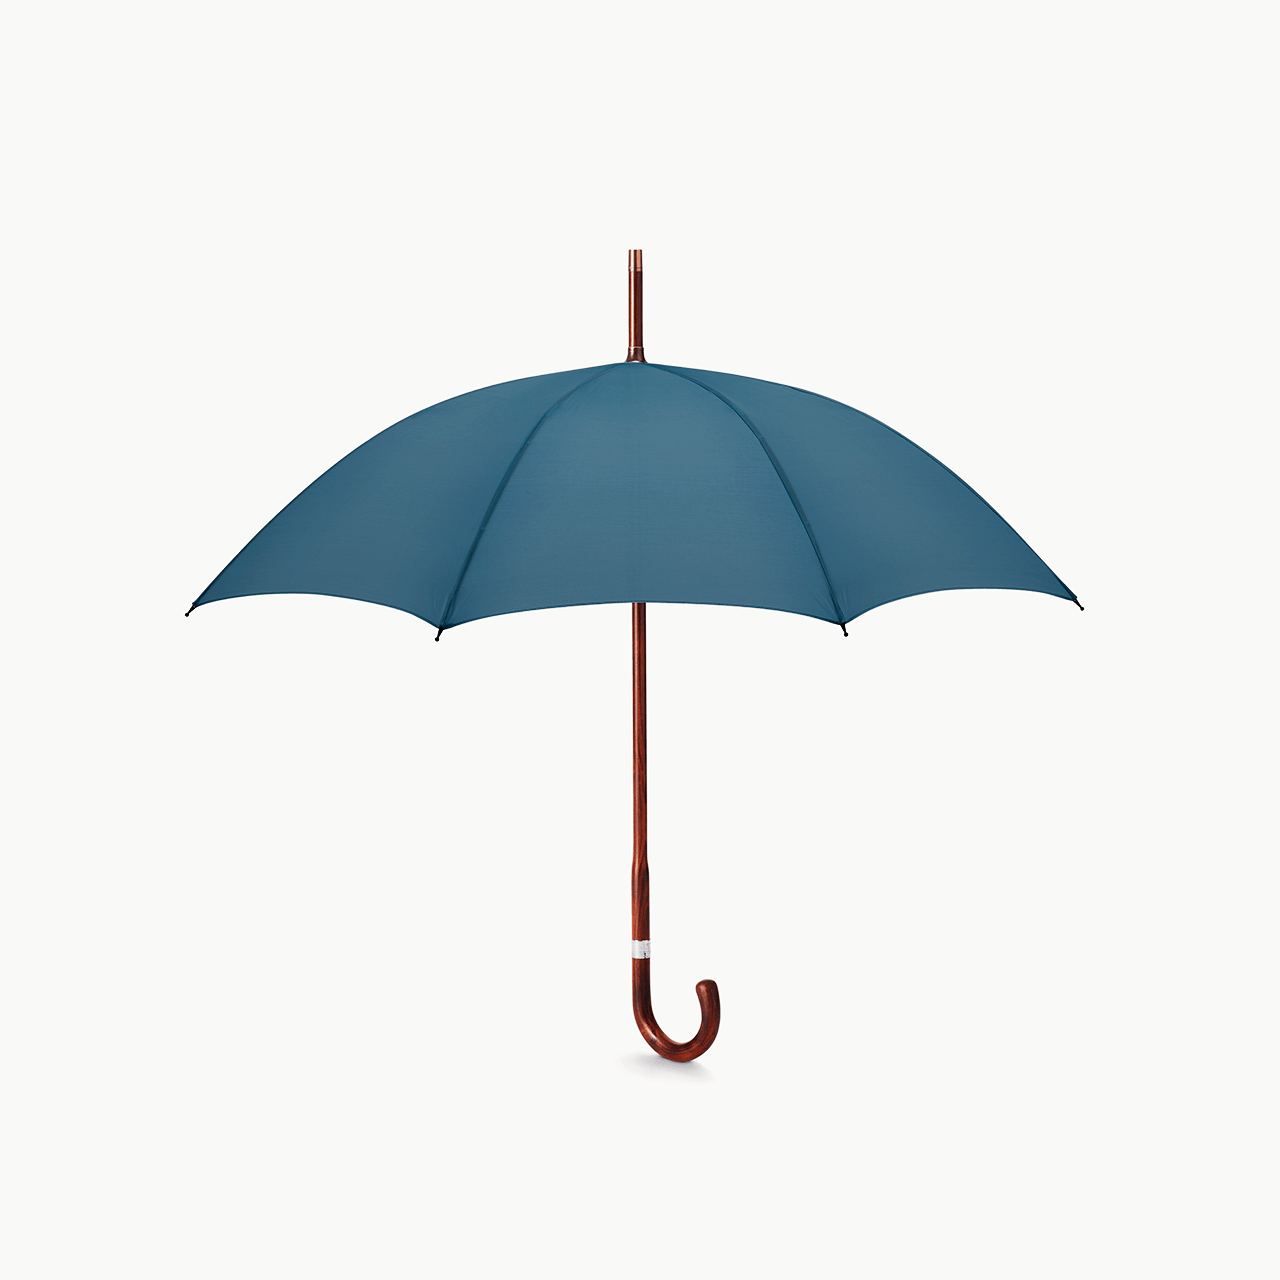 Stripped Cherry Umbrella for Women - French Navy - Swaine